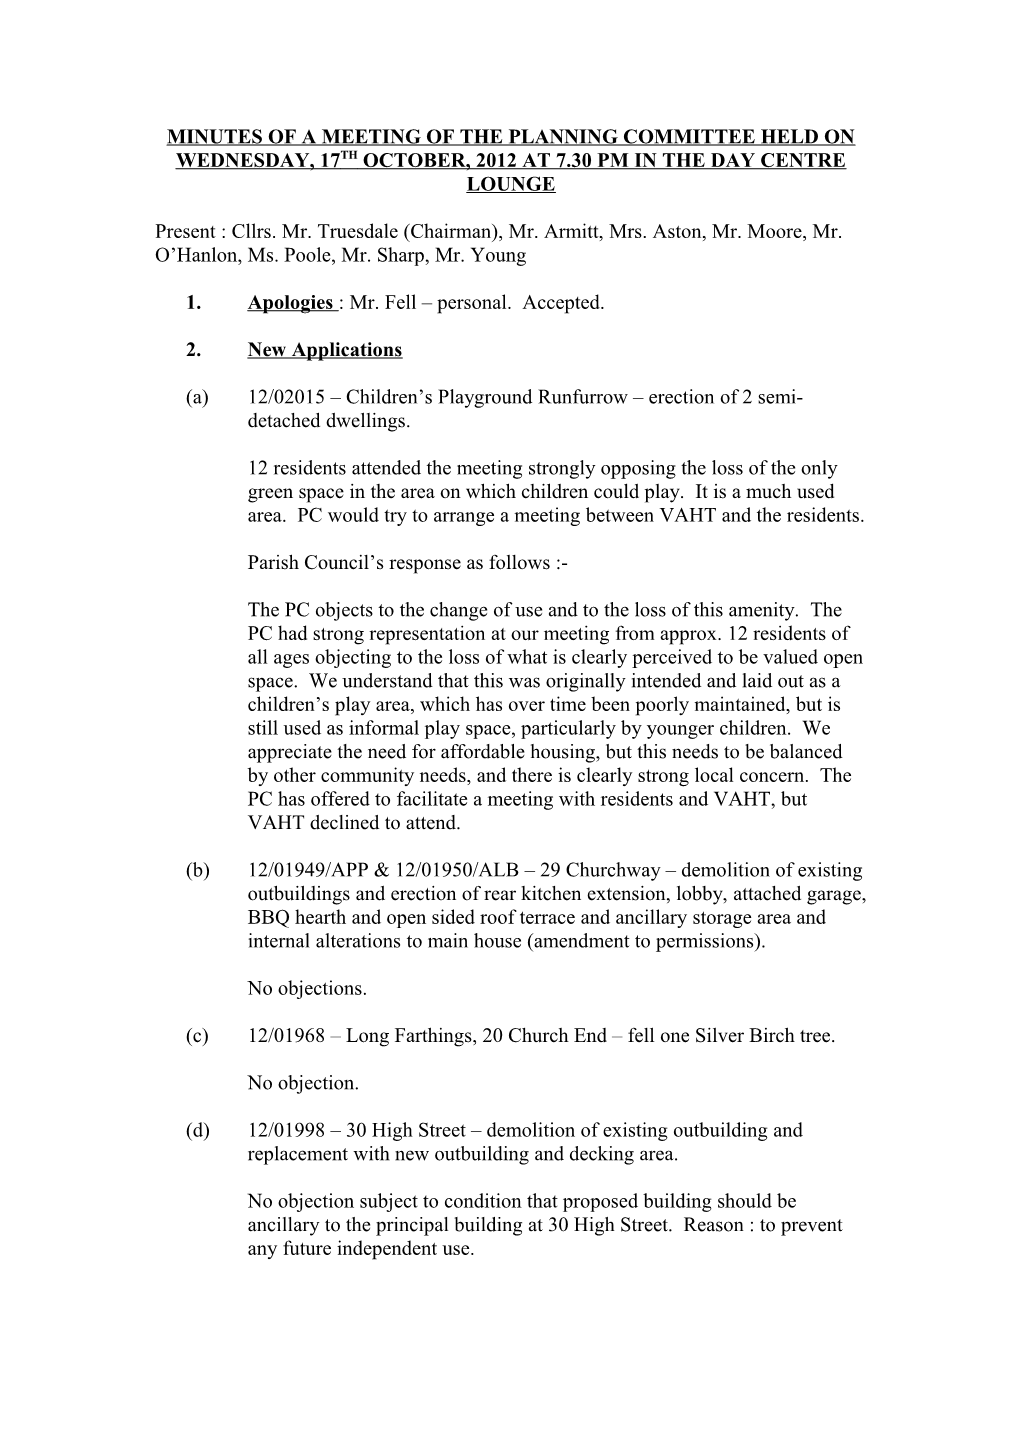 Minutes of a Meeting of the Planning Committee Held on Wednesday, 17Th October, 2012 at 7